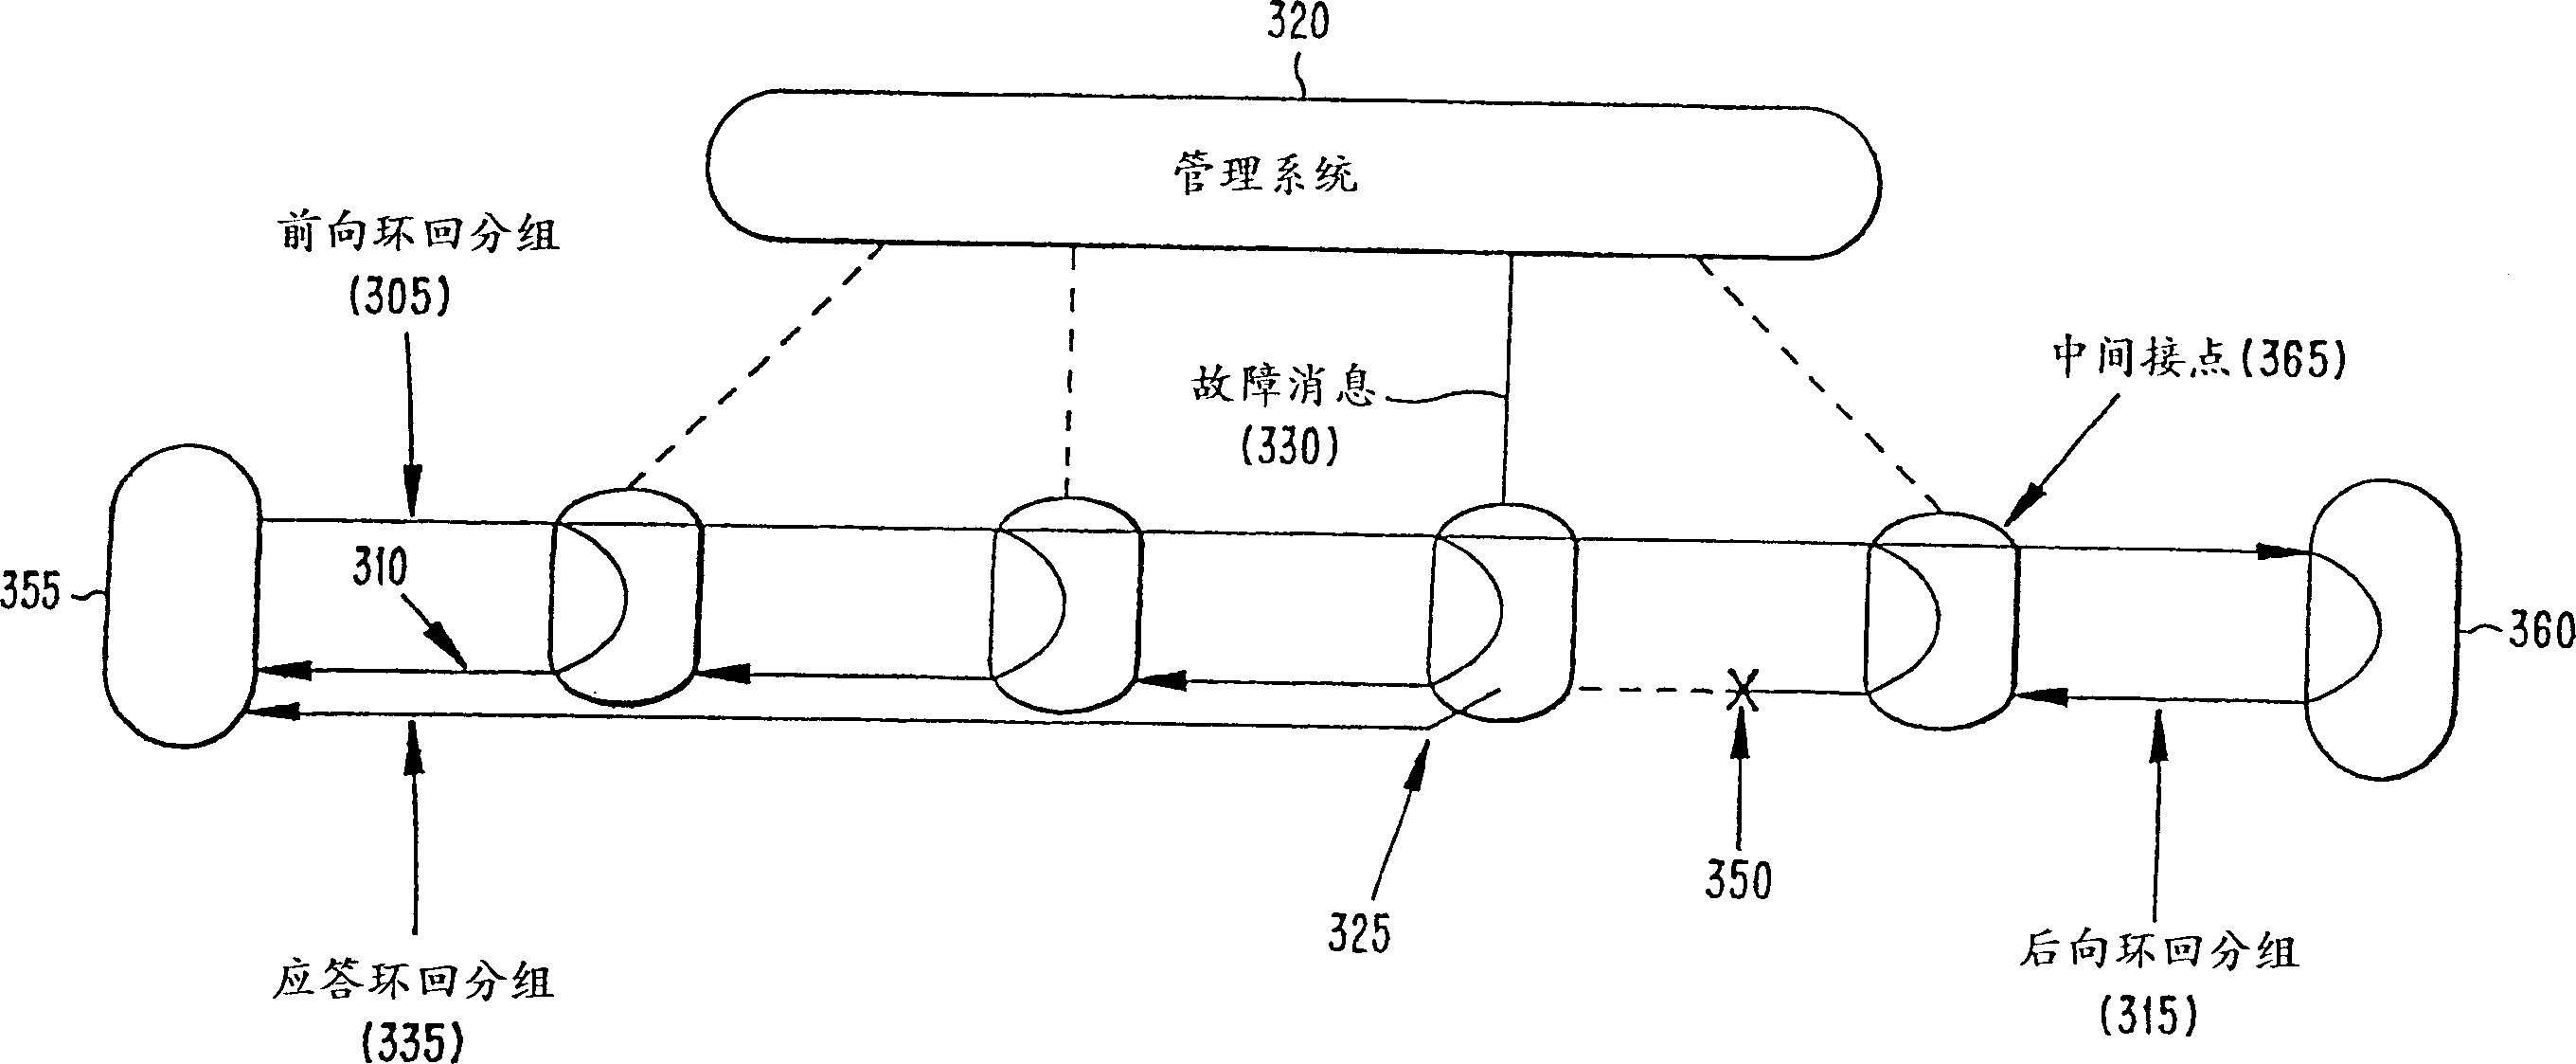 Method and apparatus for detecting and locating failure in telecommunication network